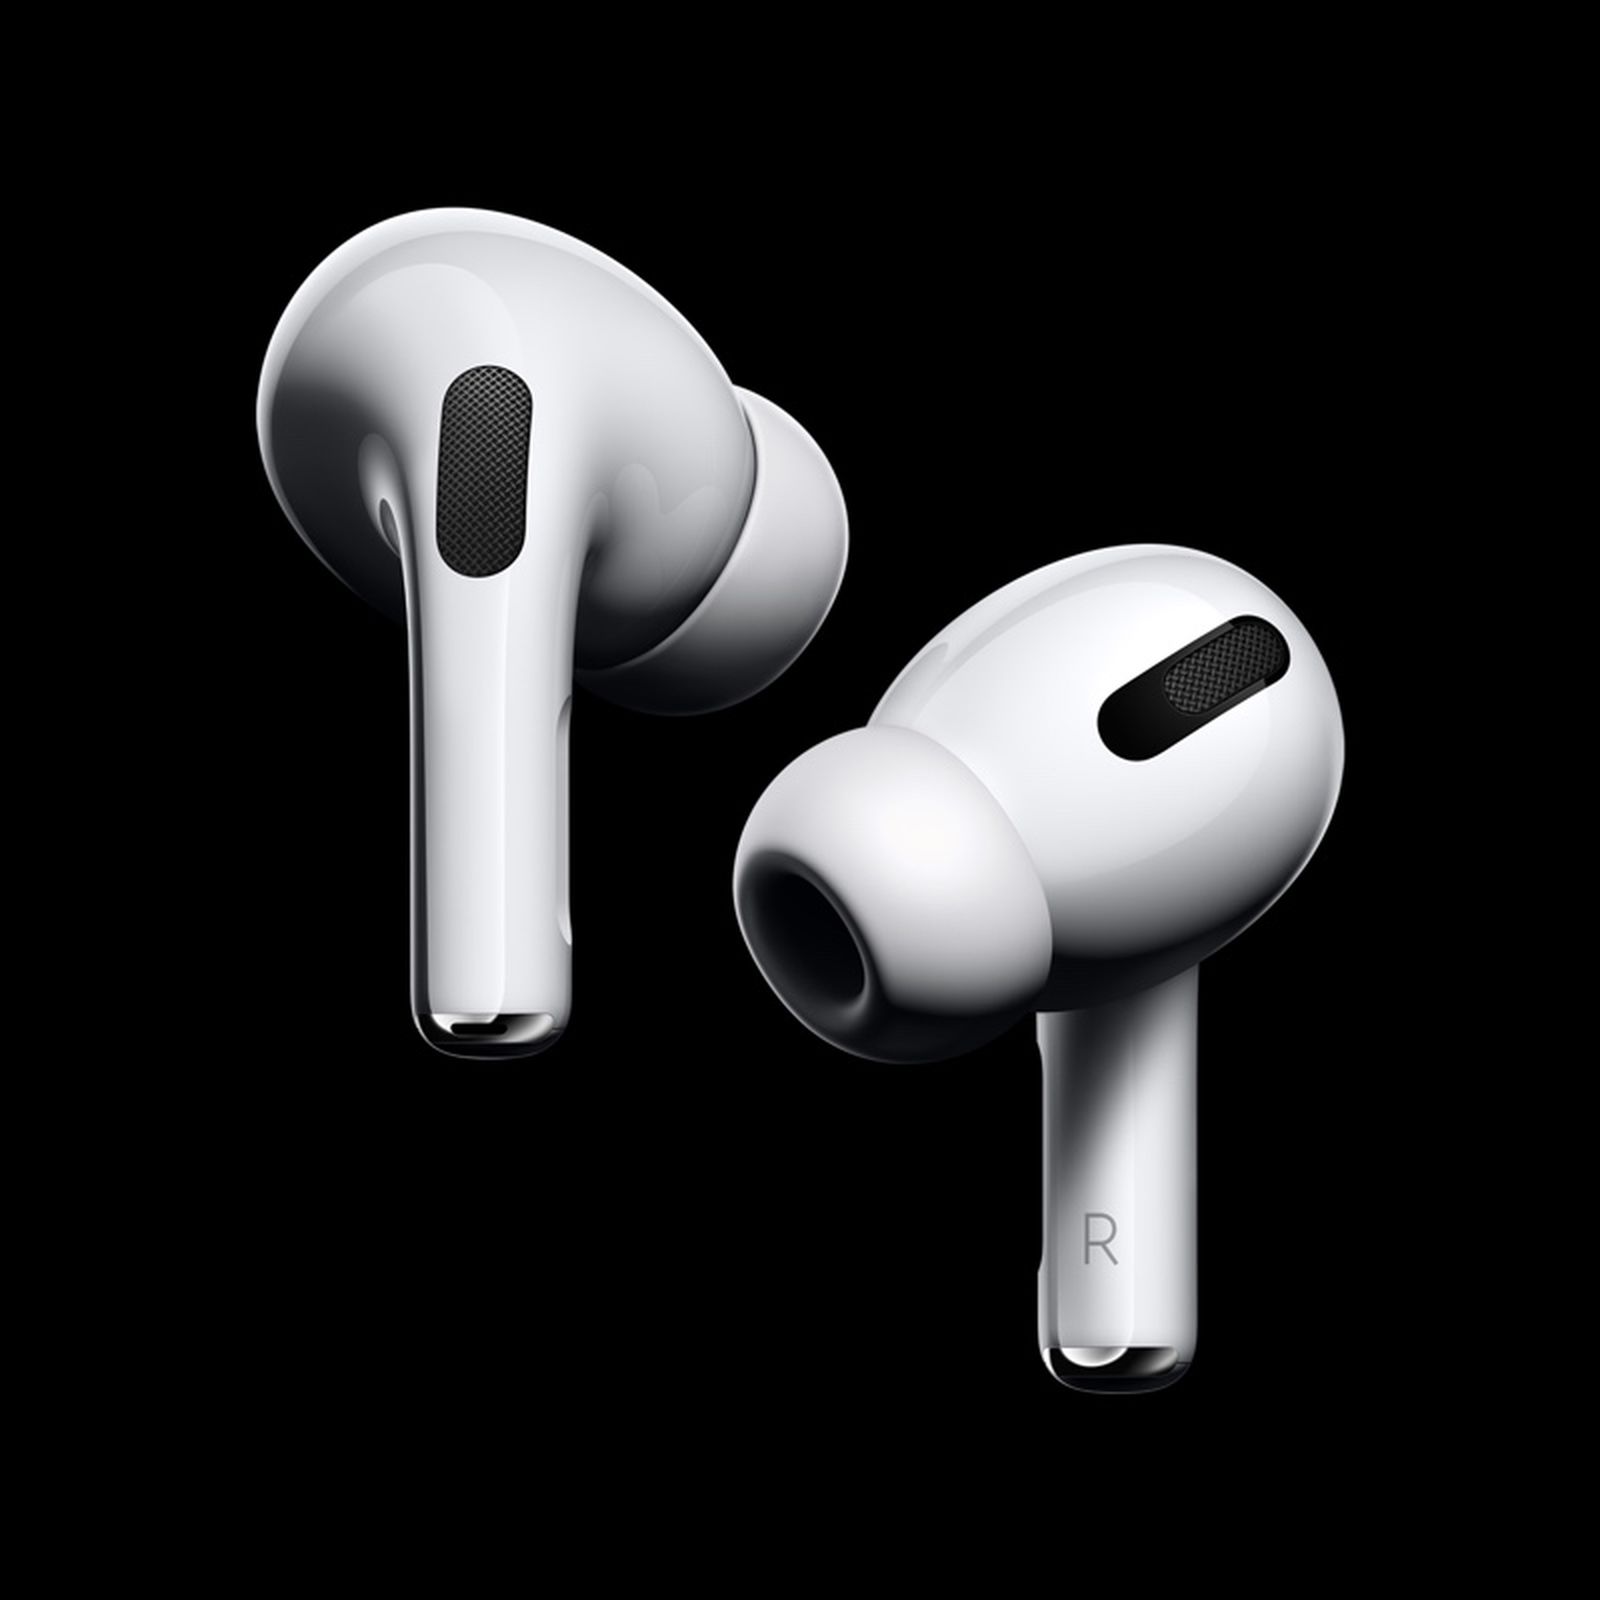 AirPods Pro Launching on October 30 for $249 - MacRumors